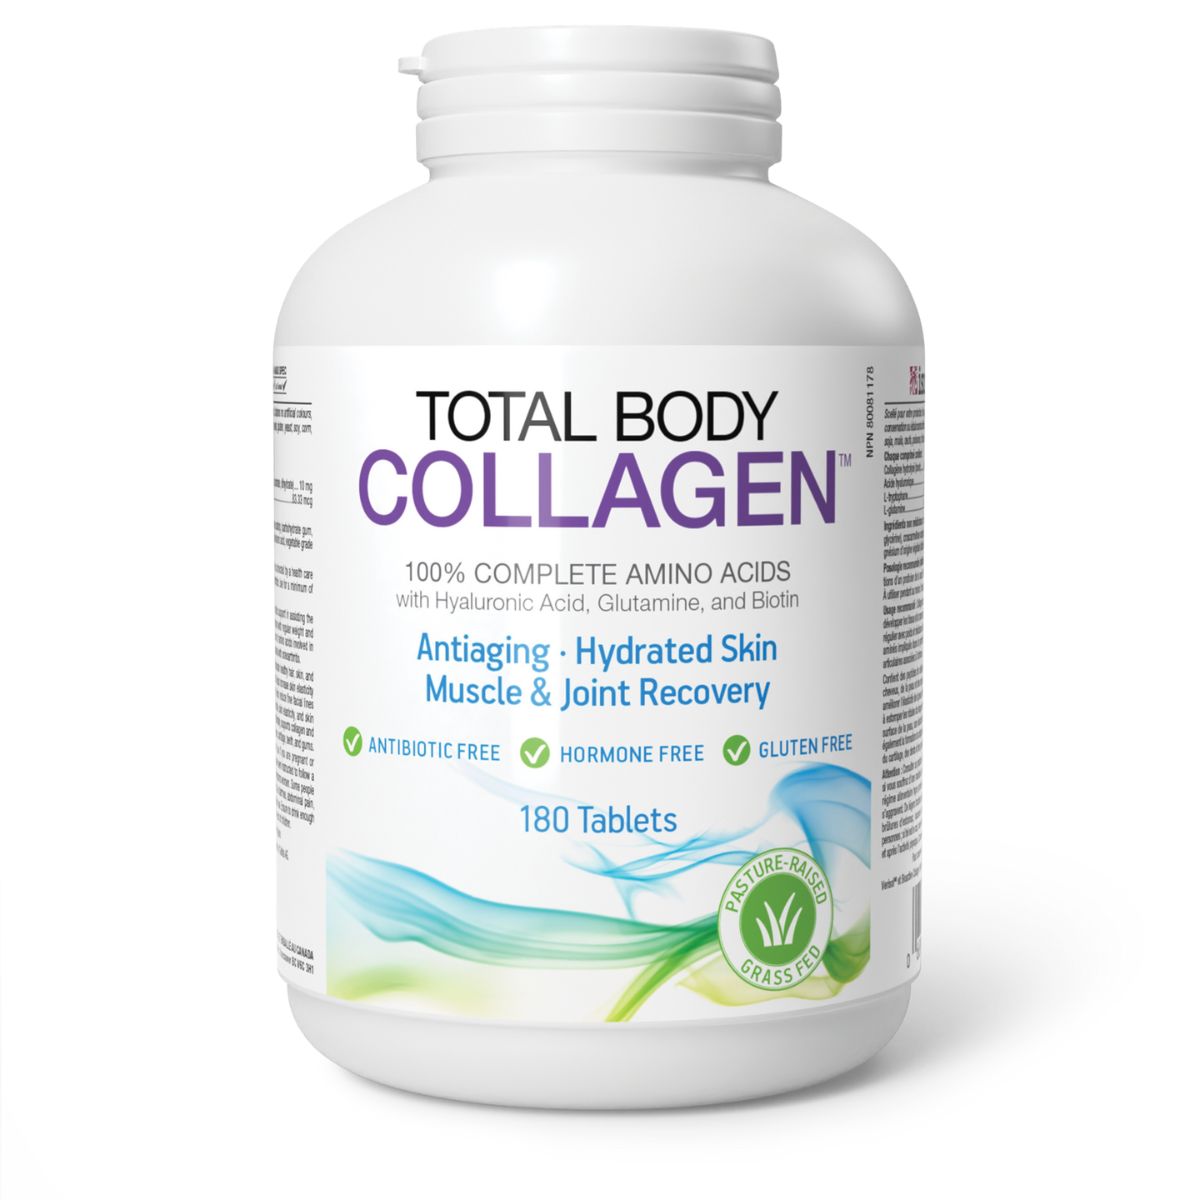 Bottle of Total Body Collagen 180 tablets, a supplement for joint health, muscle recovery, and overall wellness. 